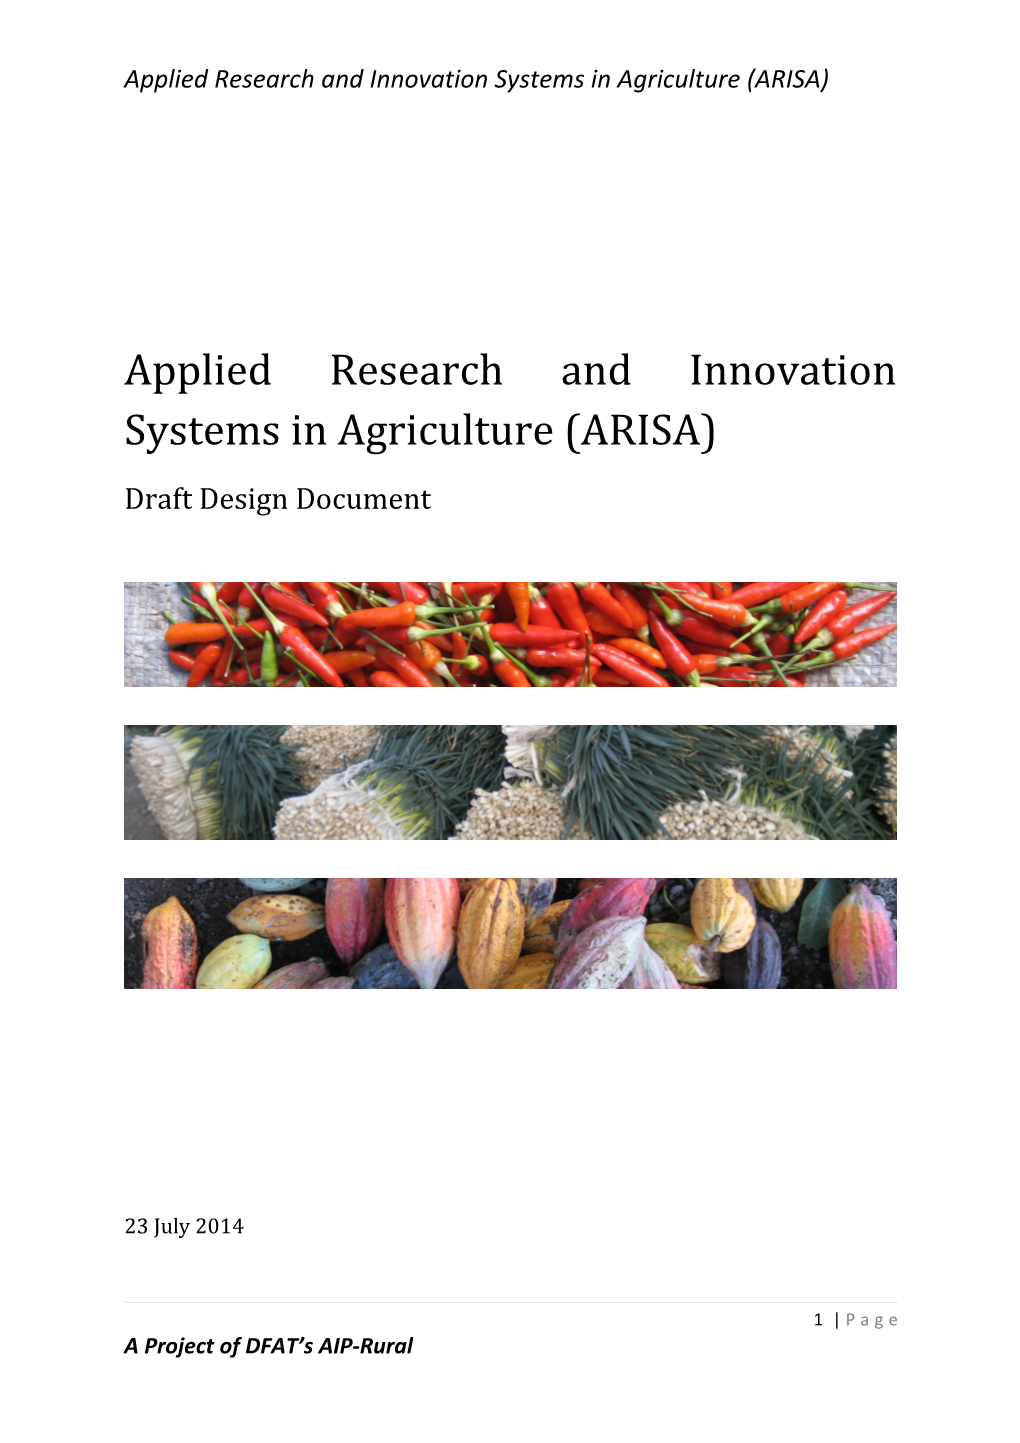 Applied Research and Innovation Systems in Agriculture (ARISA)